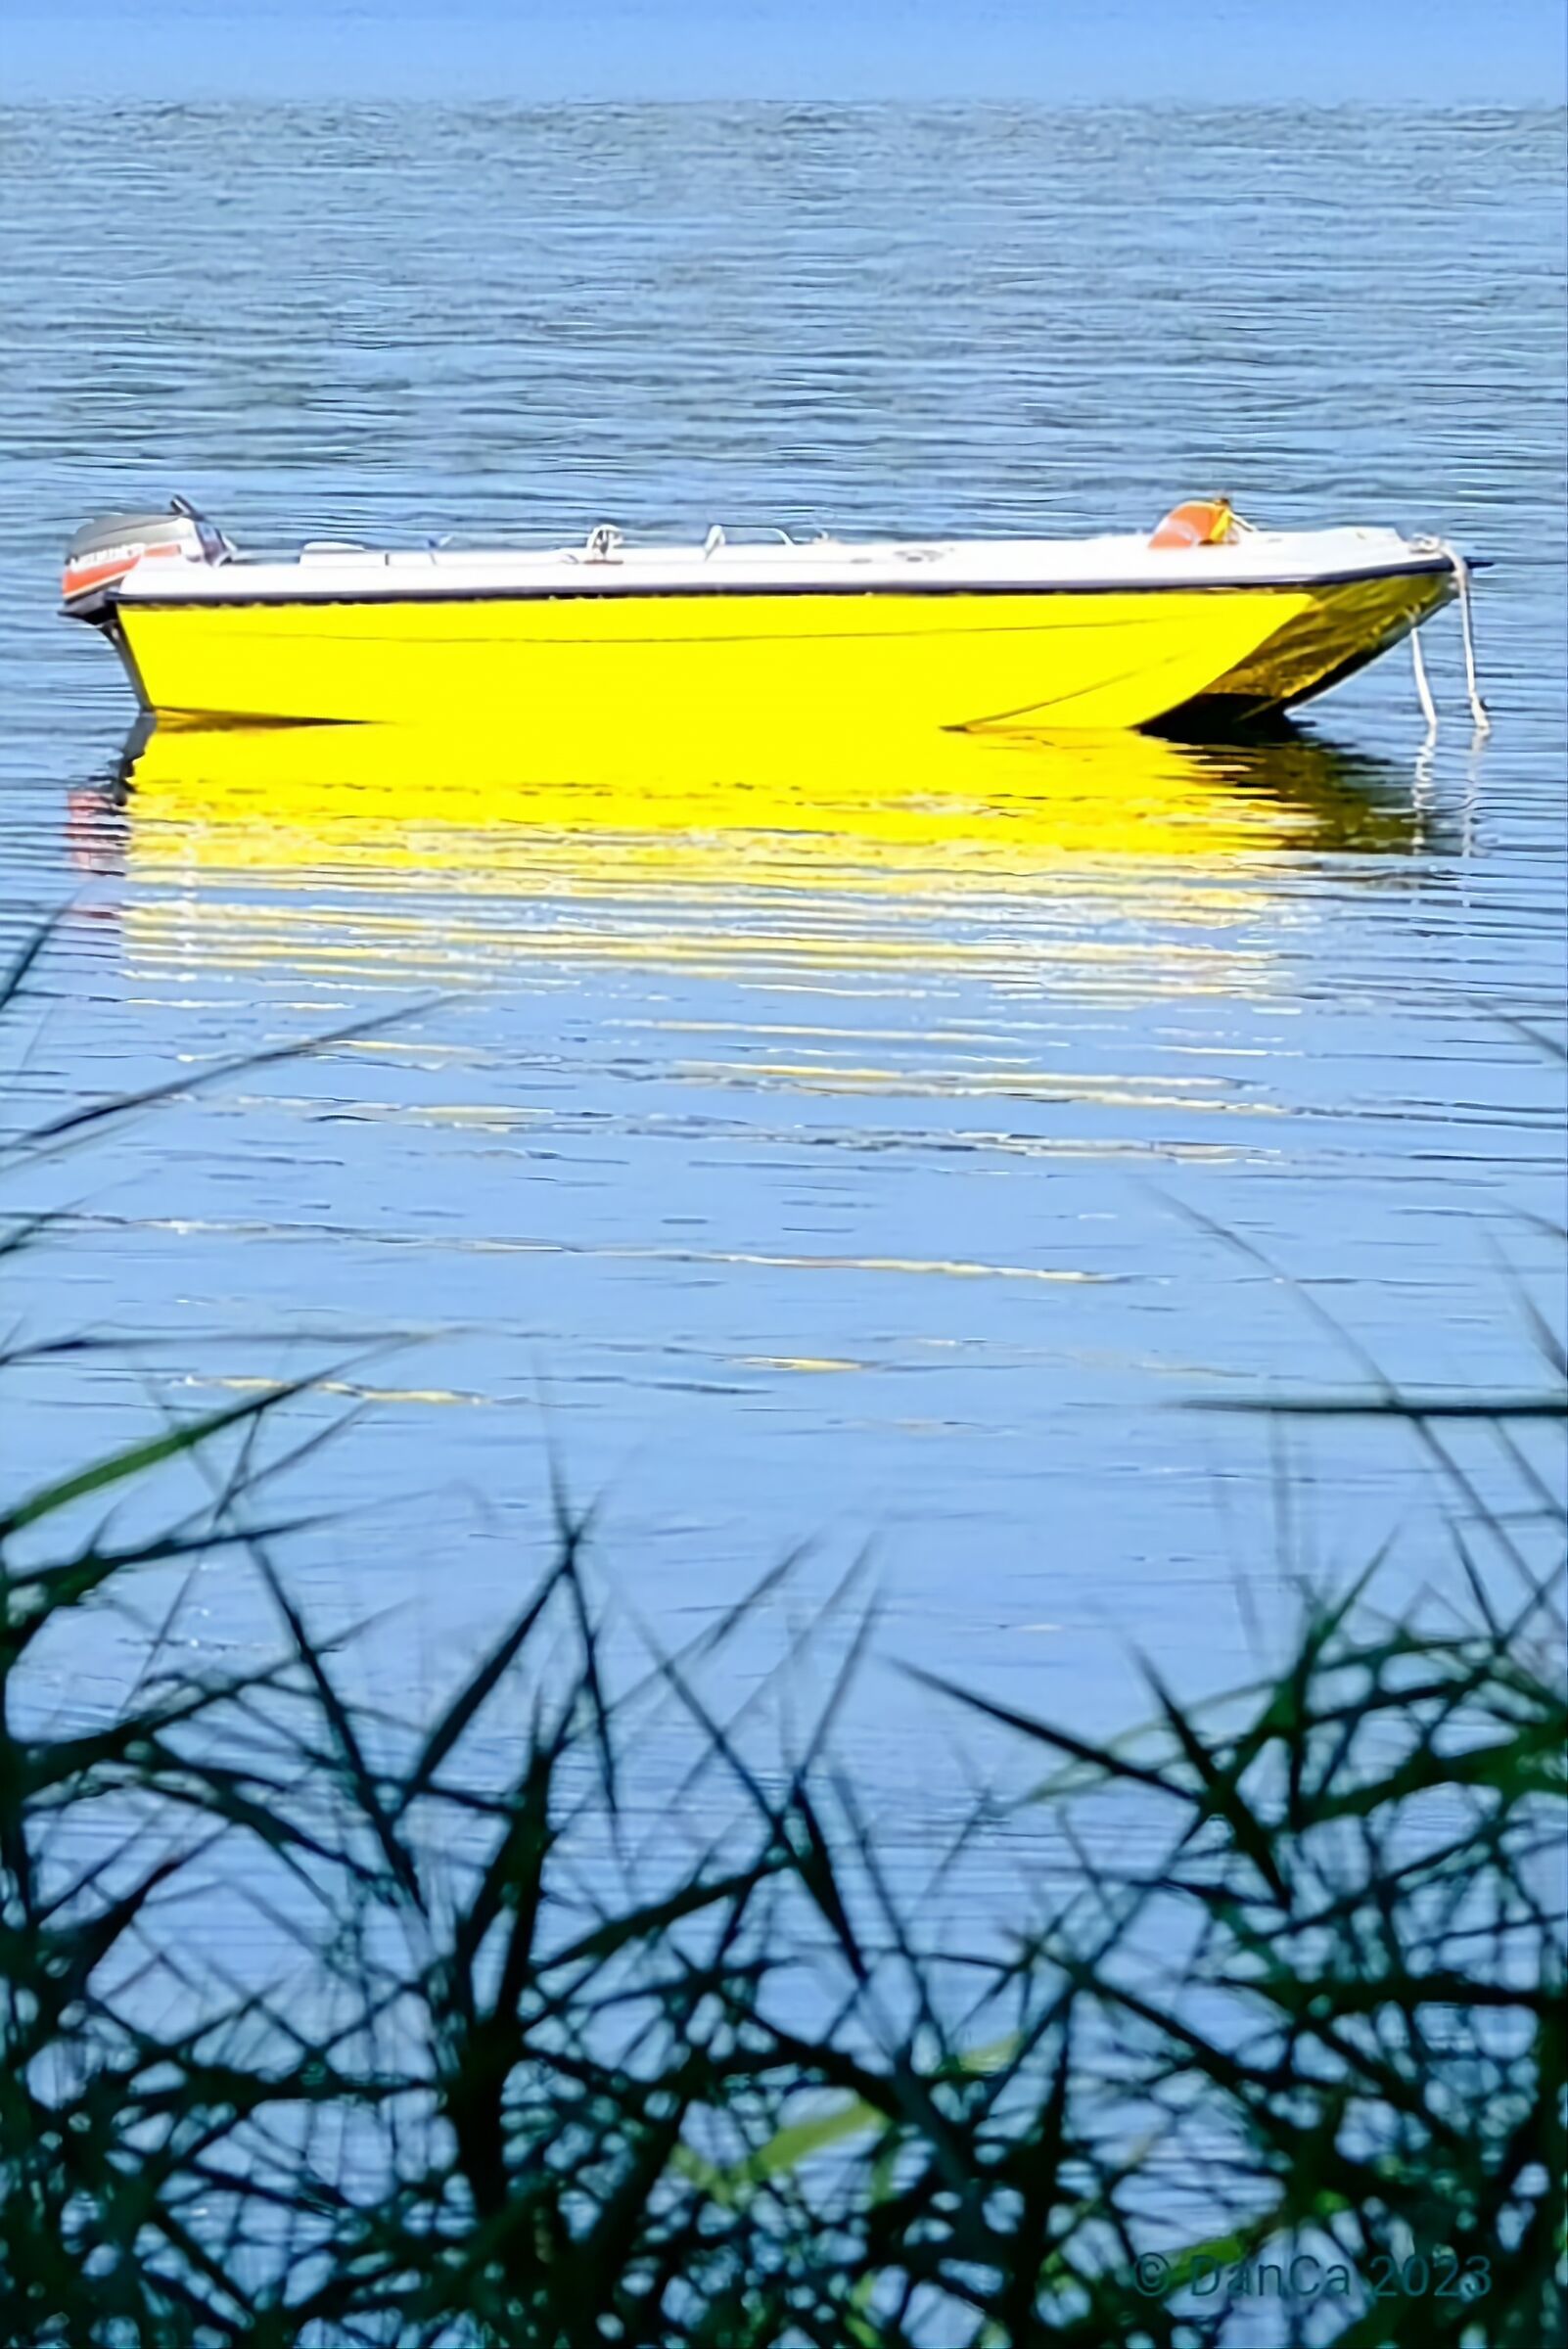 The yellow boat...